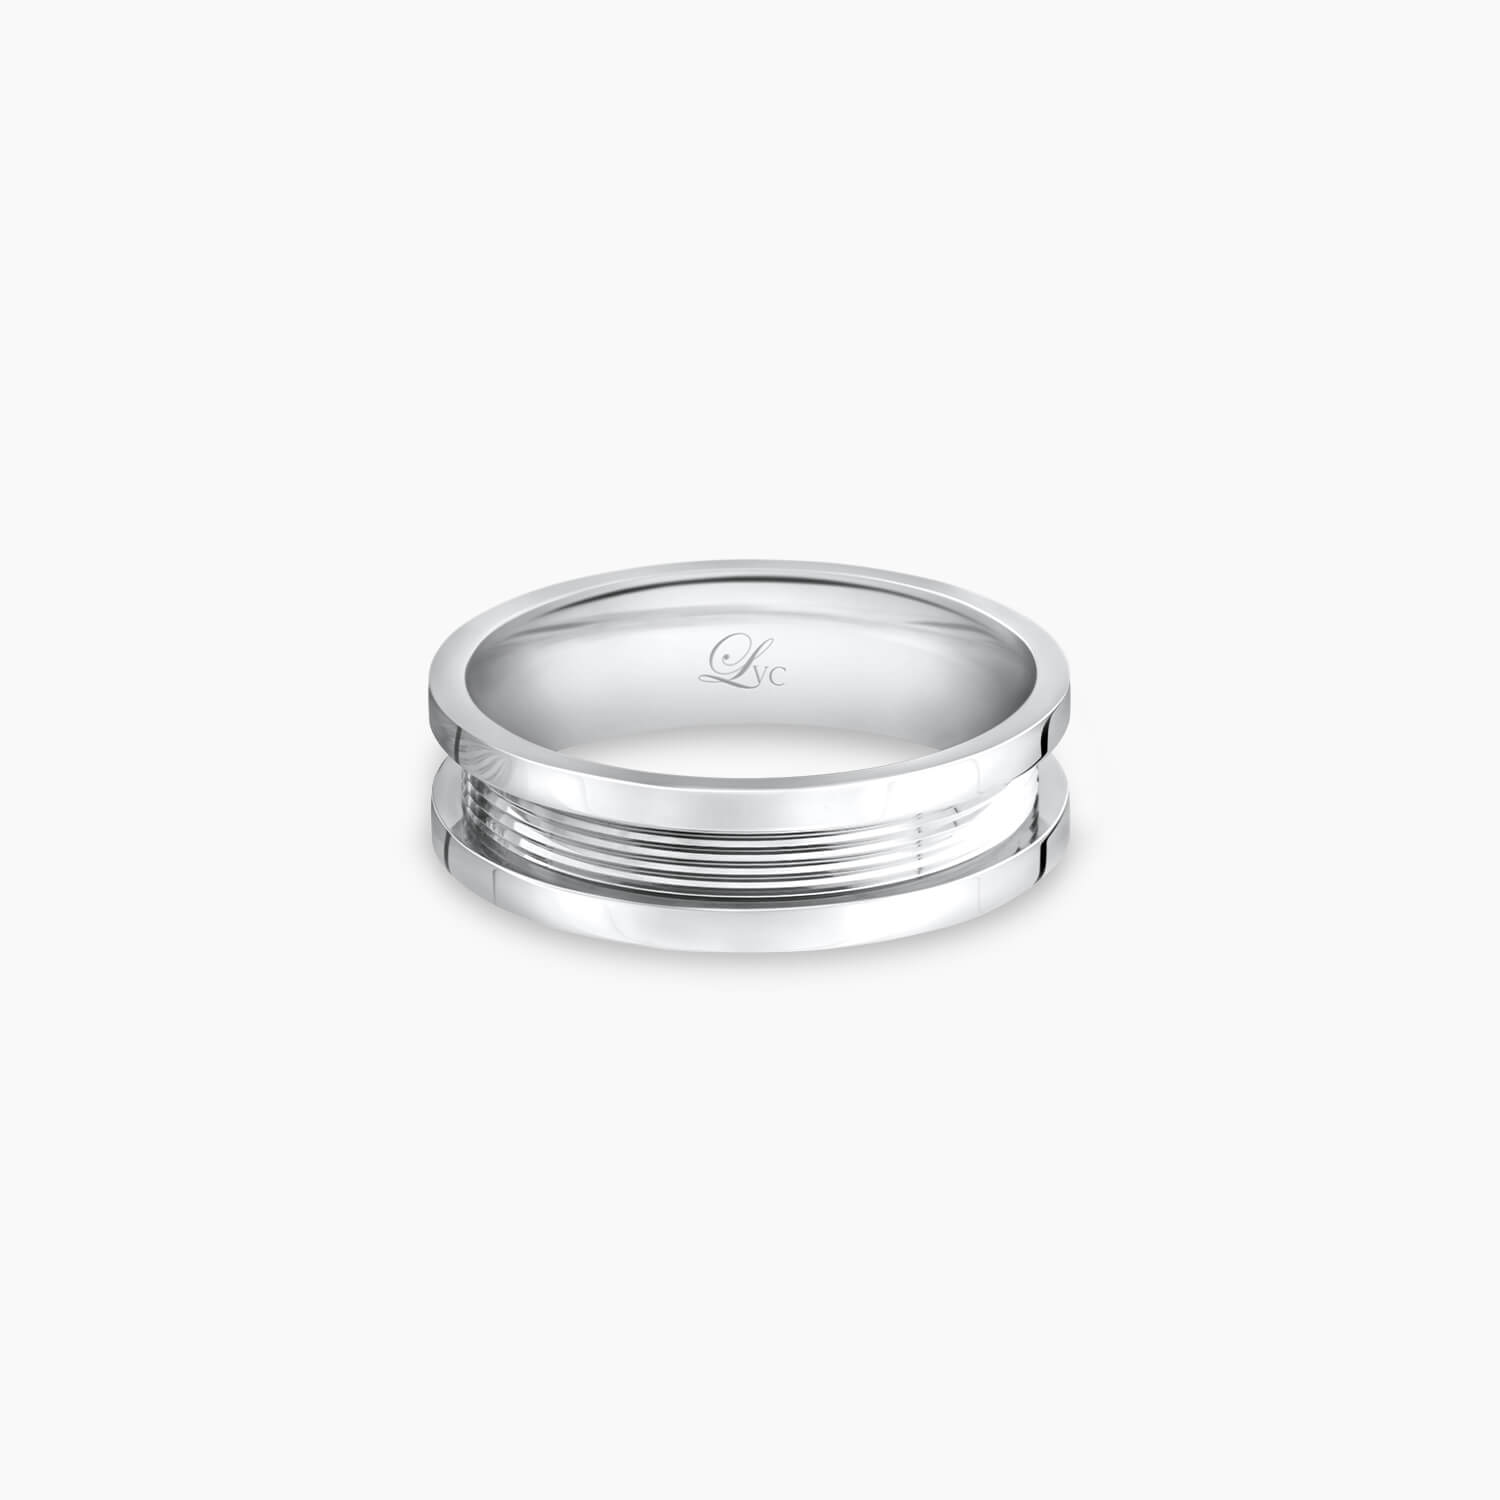 LVC PROMISE PURE WEDDING BAND IN WHITE GOLD a white gold engagement wedding ring or wedding band for men in white gold